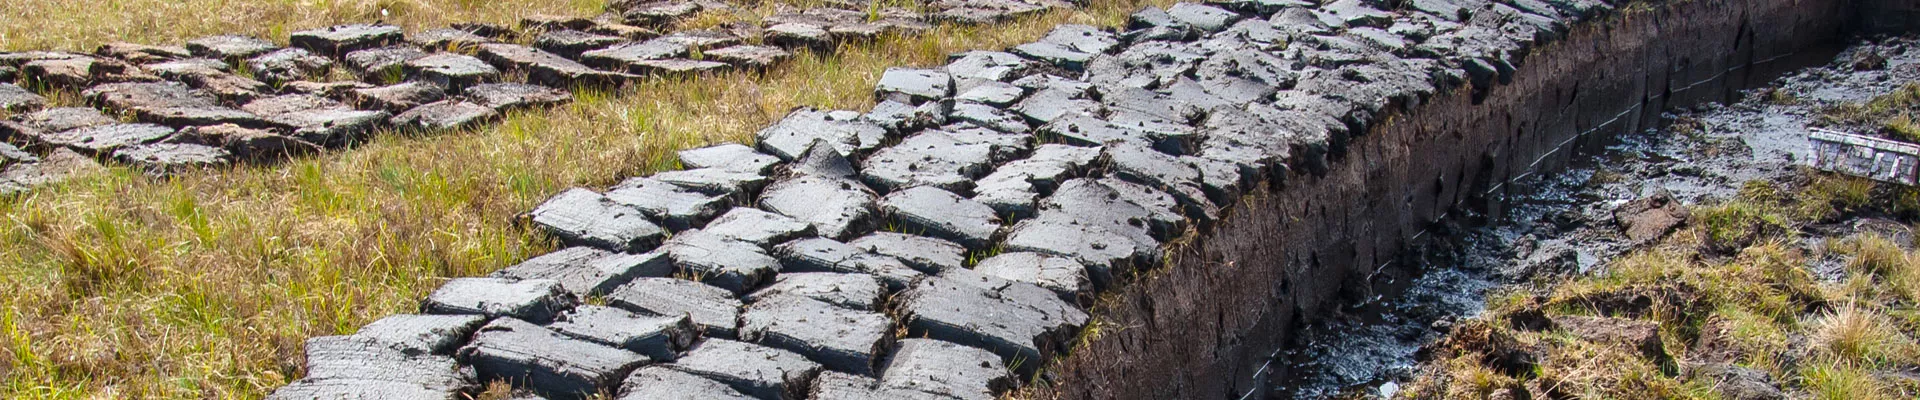 Different types of high peat